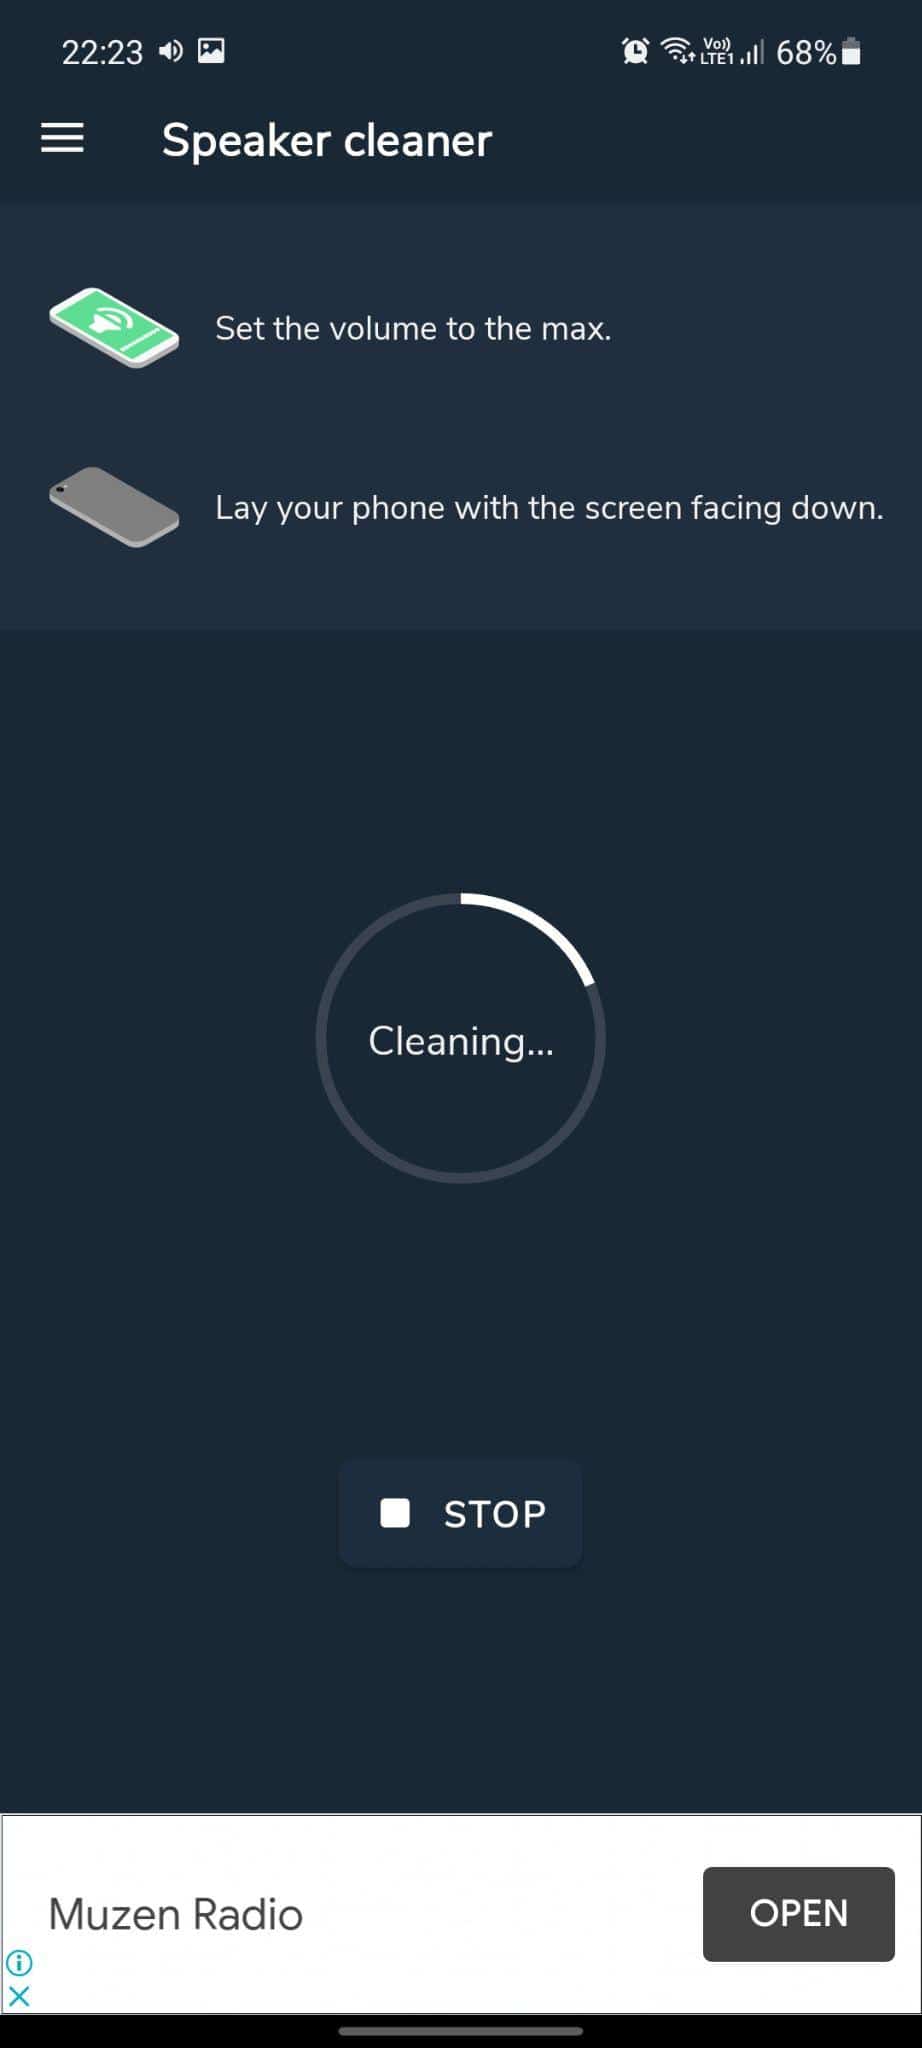 Speaker Cleaner Remove water & fix sound app Cleaning in process.